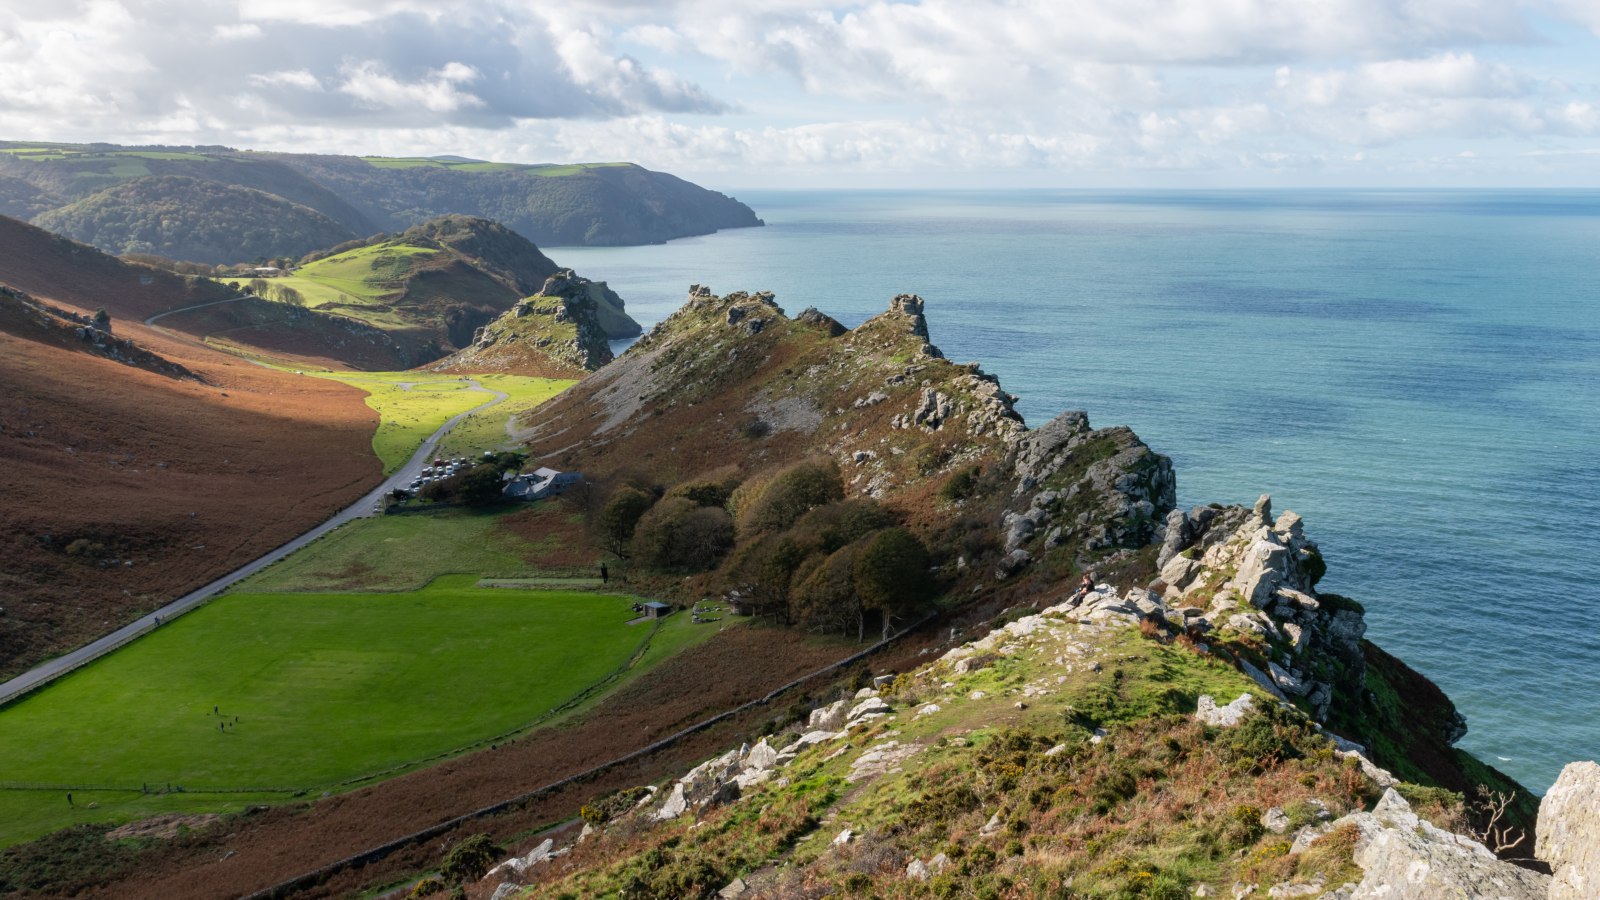 A bird's eye view of the Valley of the Rocks in Exmoor National Park with the valley basin, cliffs and road in focus